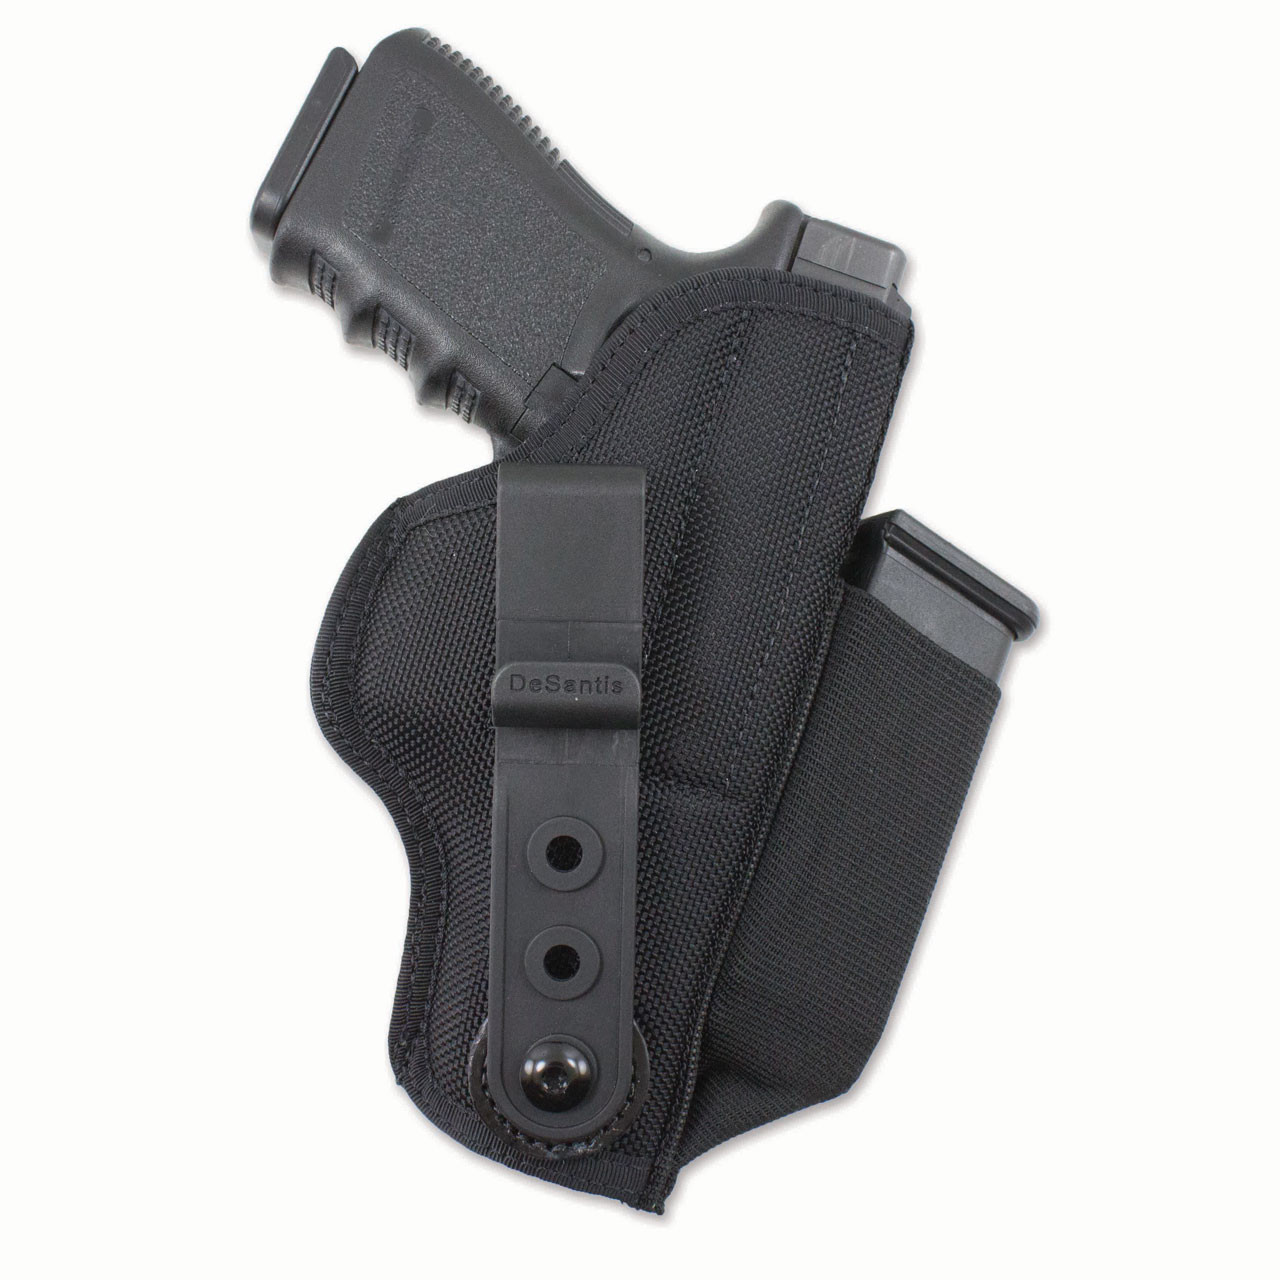 Details about   Pro Carry Ankle Holster Gun Holster LH RH For Kel Tec PF9 